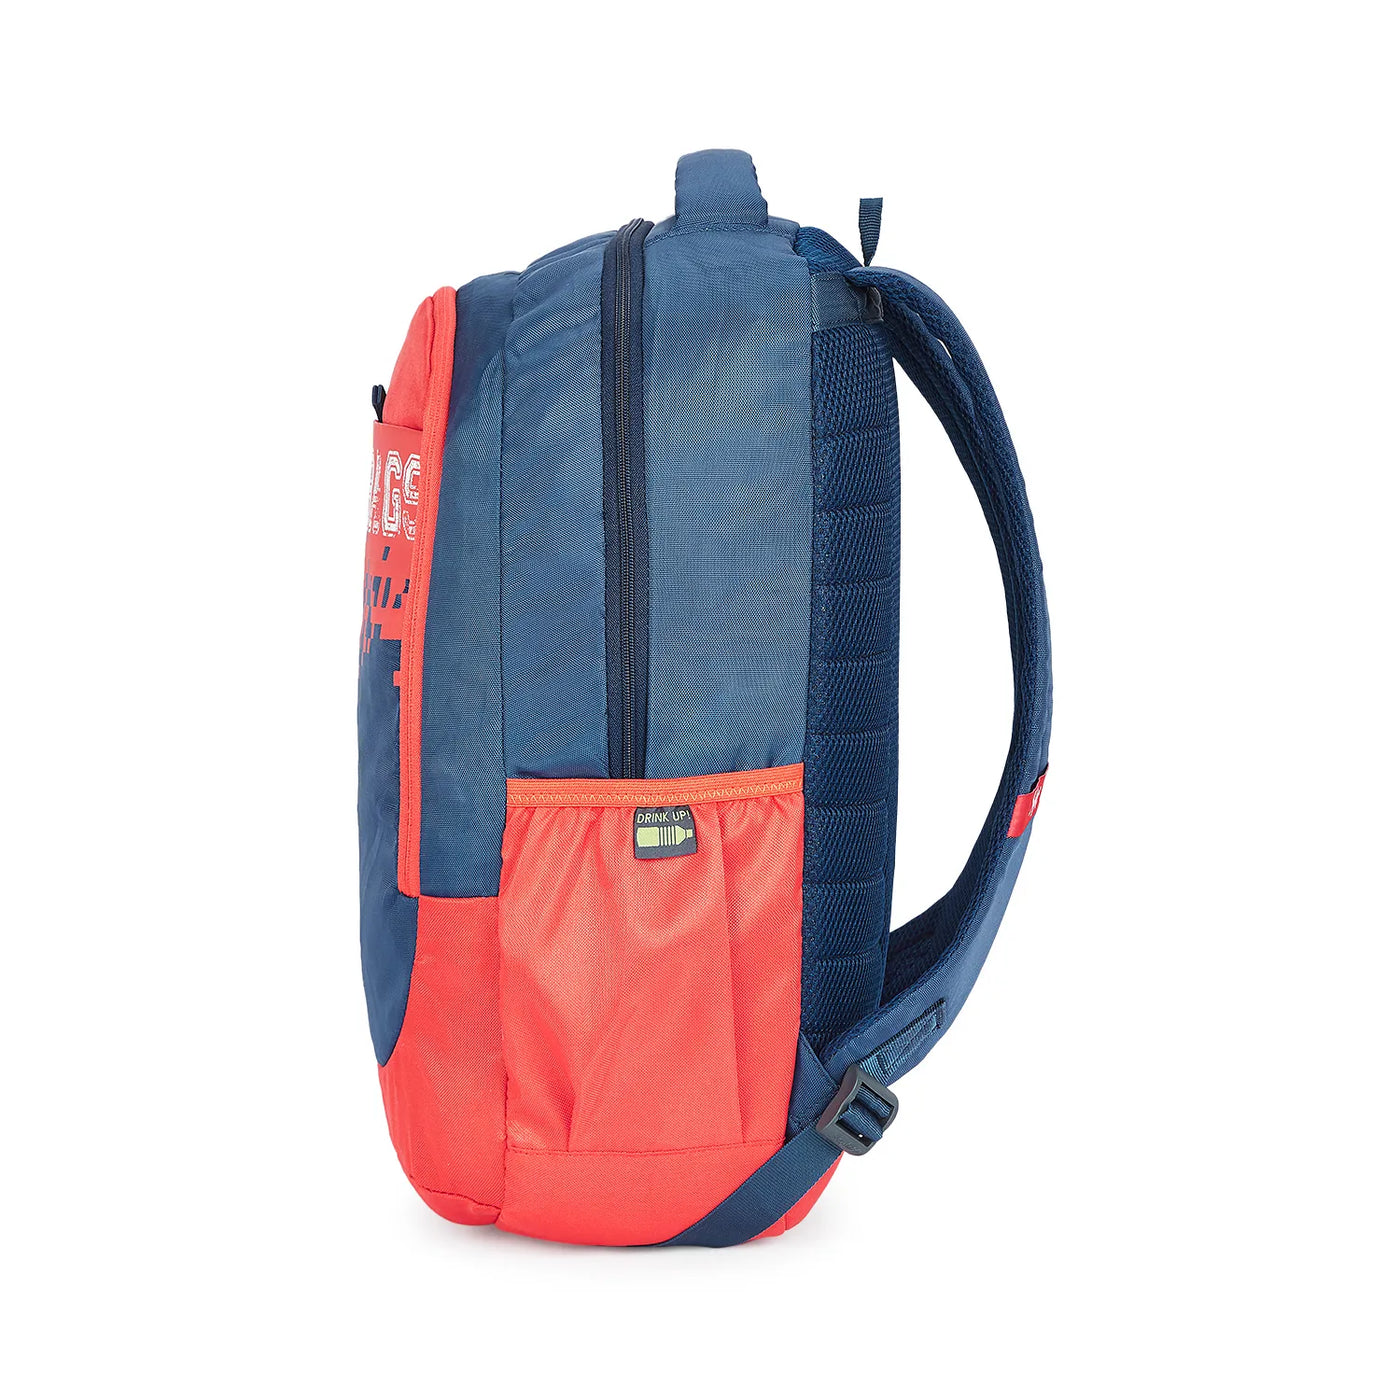 SKYBAGS BFF "2 BACKPACK RED"